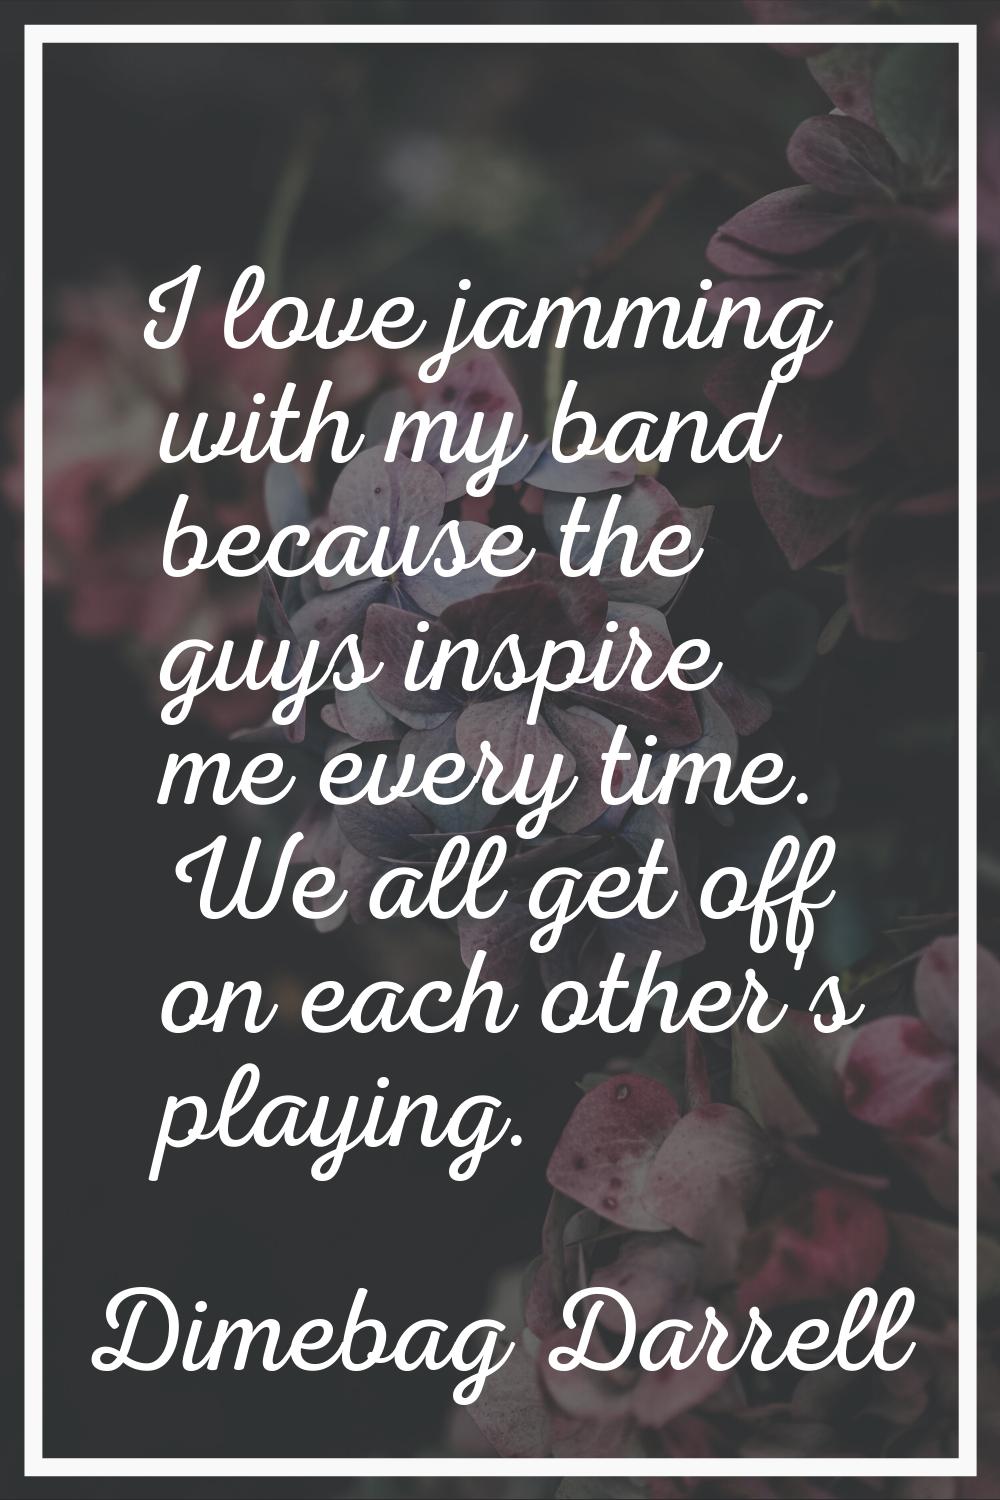 I love jamming with my band because the guys inspire me every time. We all get off on each other's 